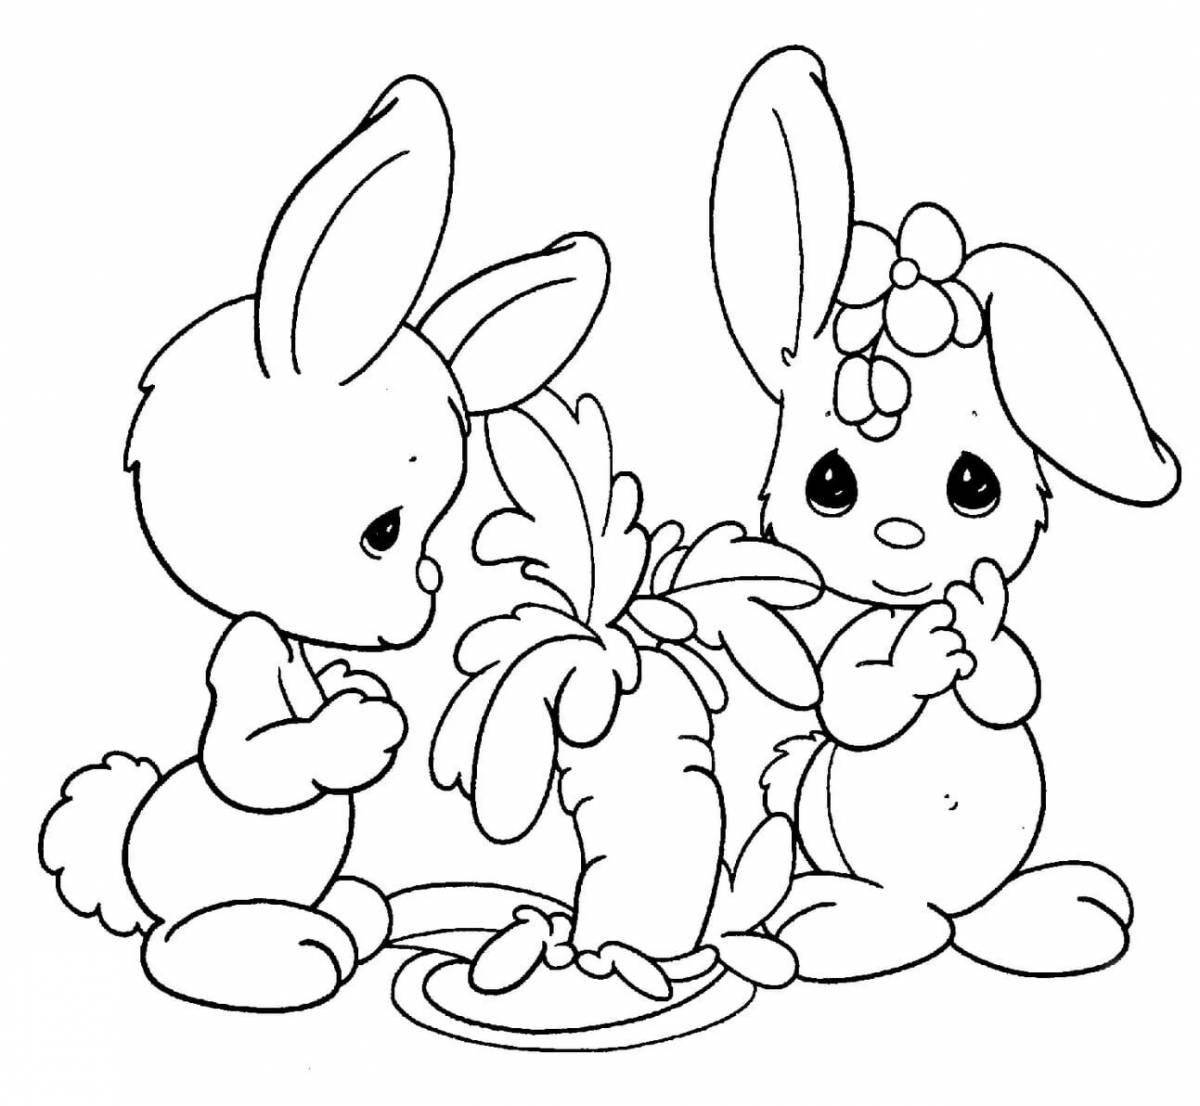 Naughty rabbit and squirrel coloring book